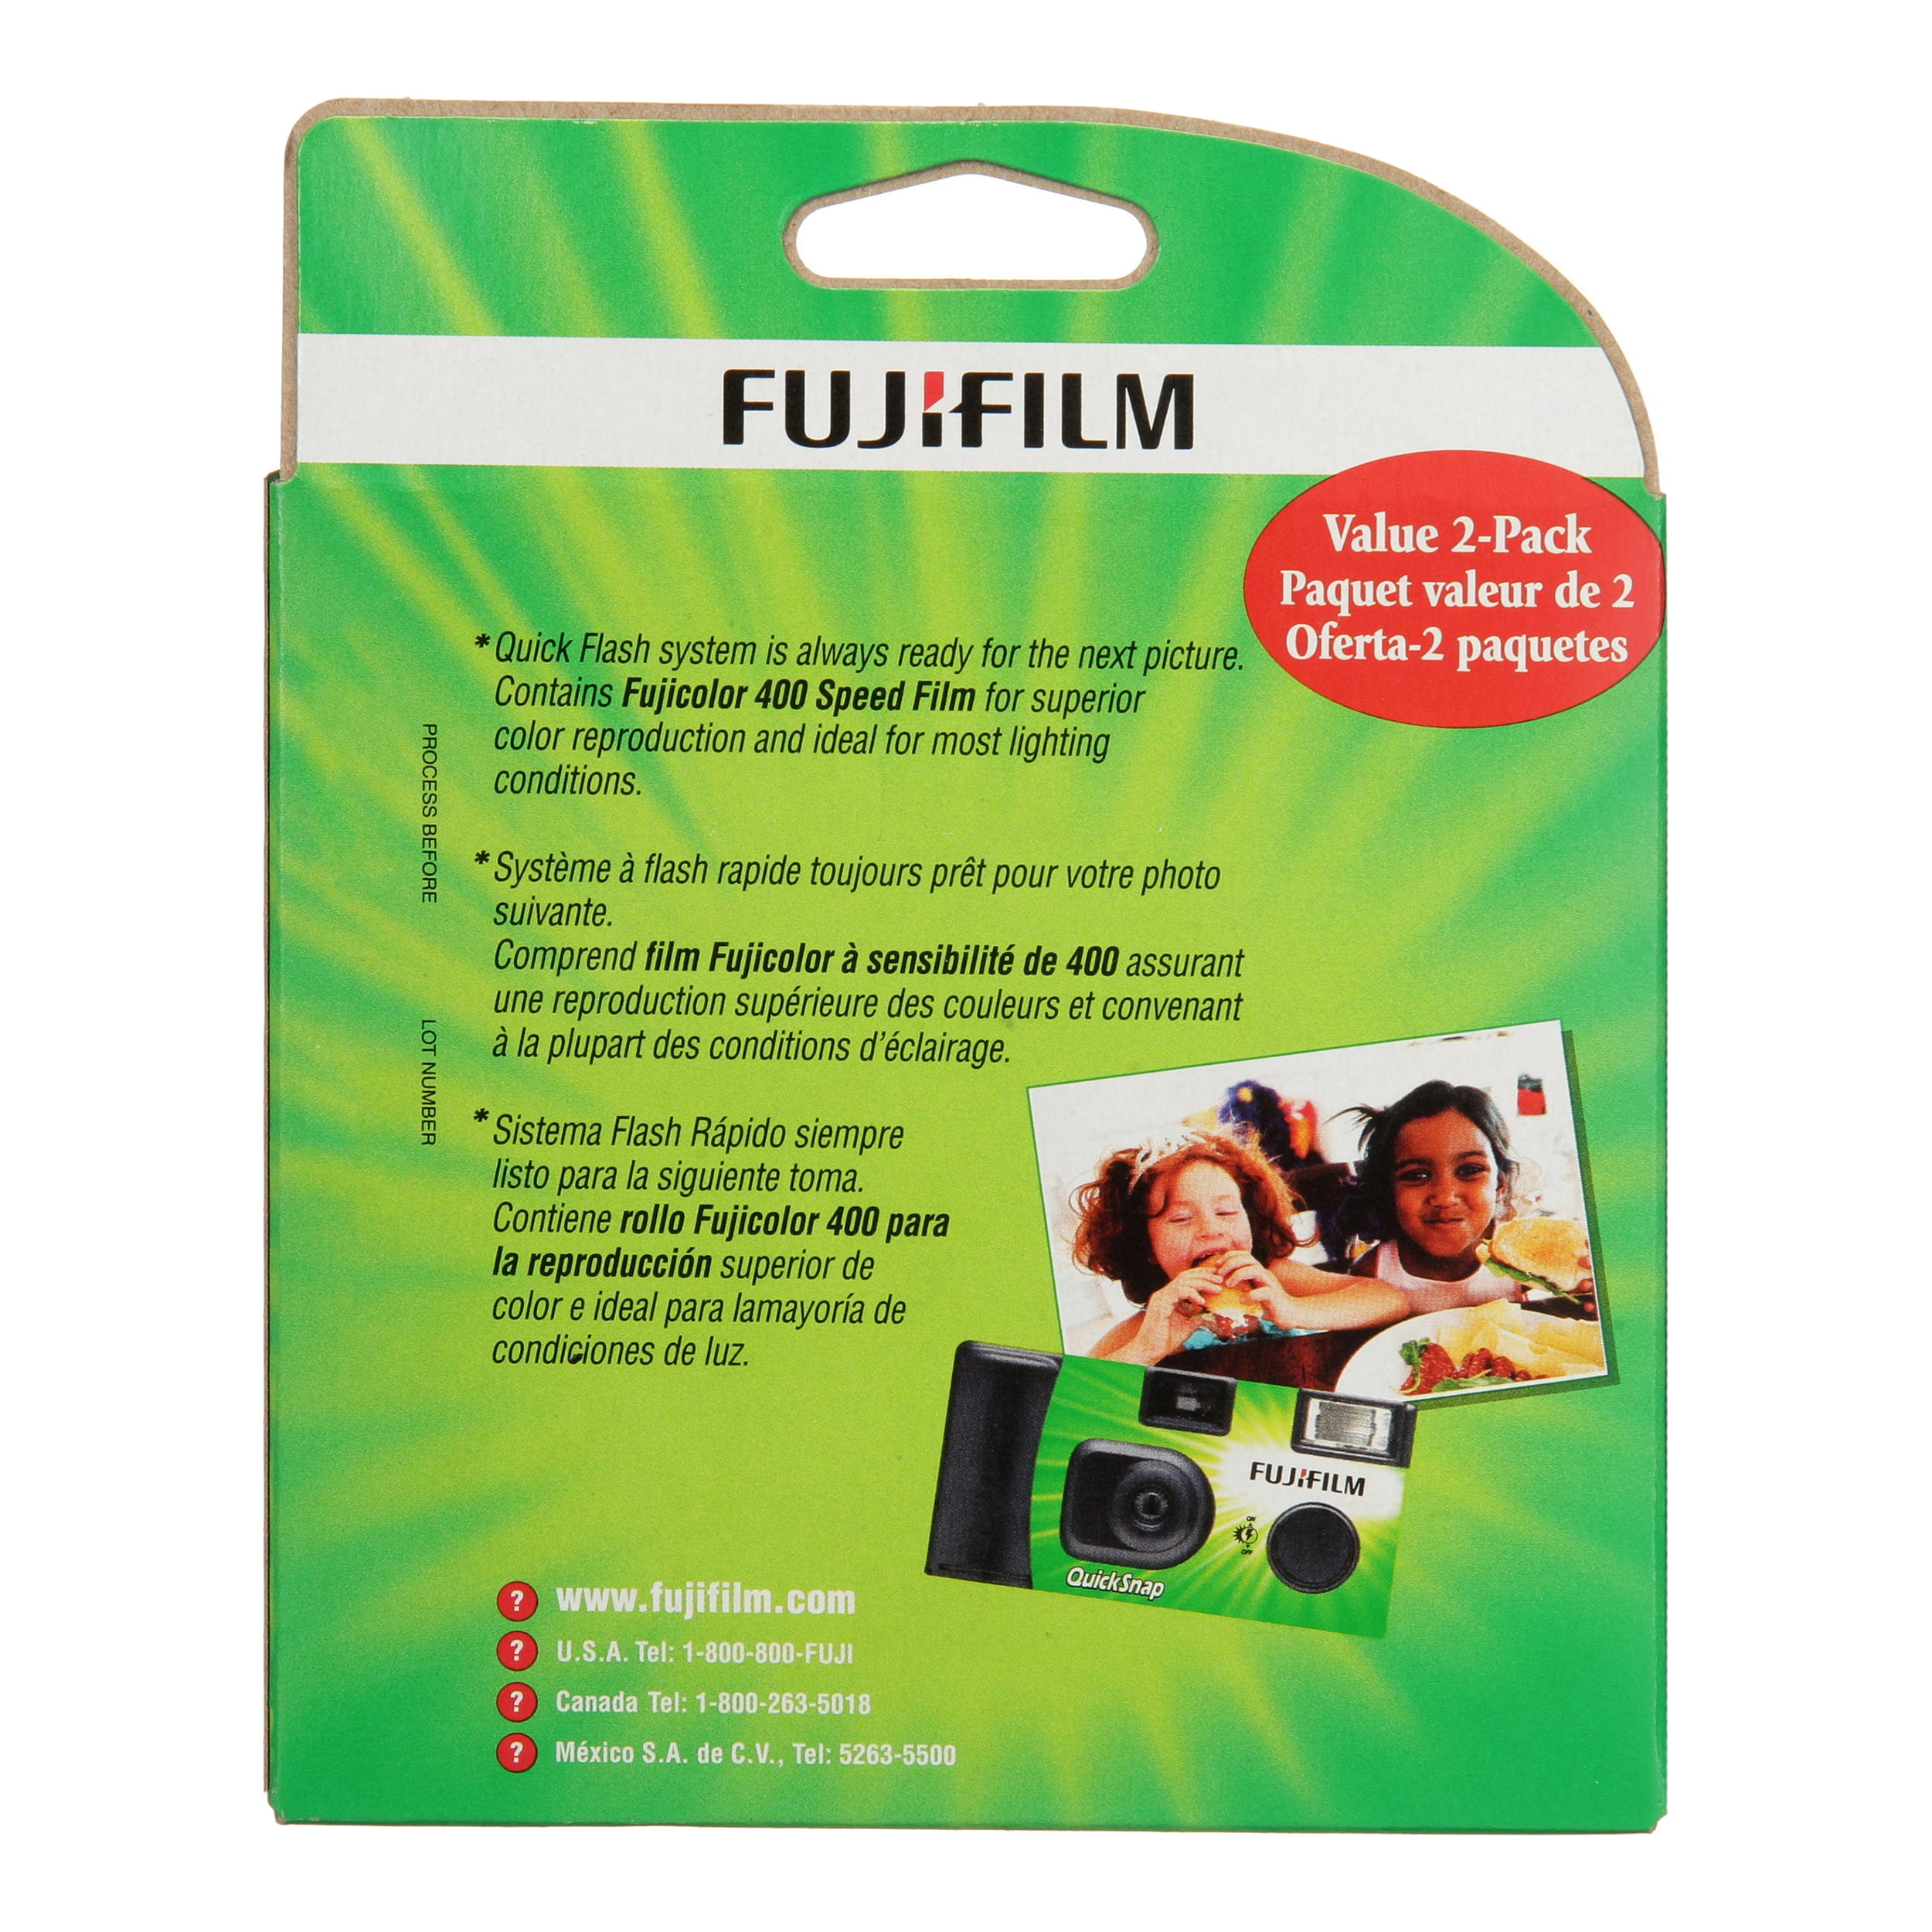 3 Fujifilm 24mm Advanced Photo System QuickSnap One-Time Use Camera 